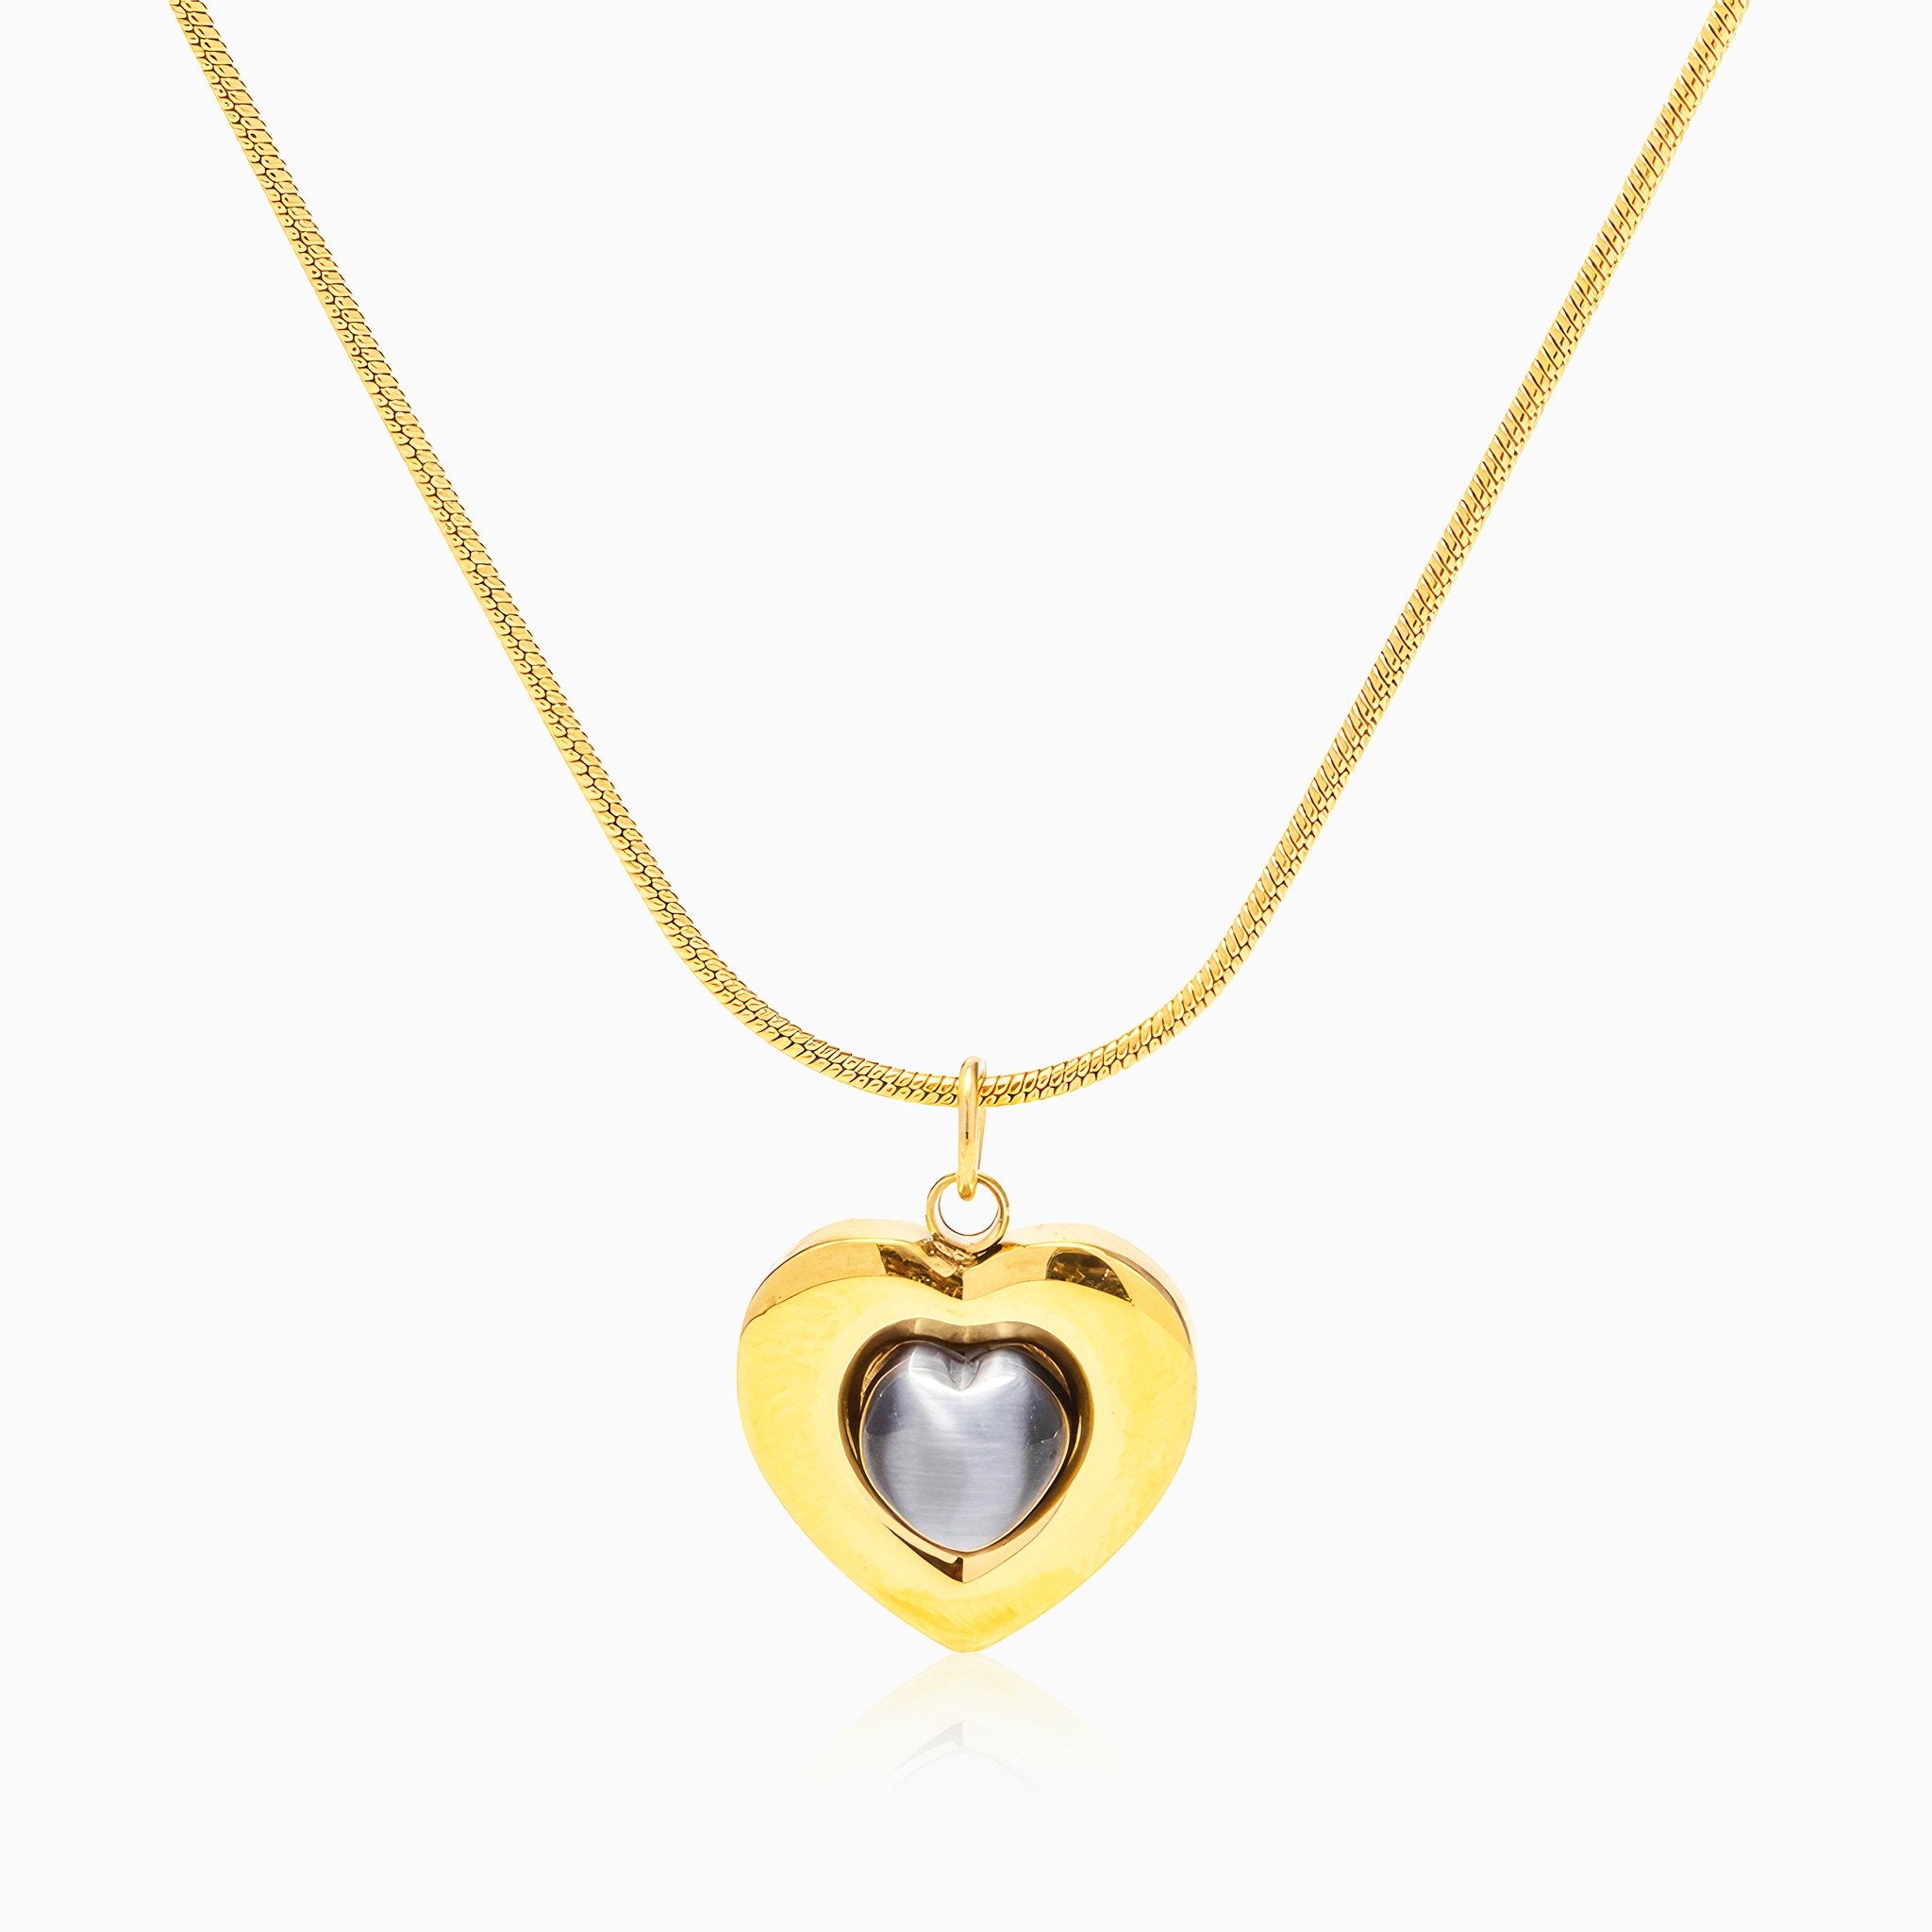 Heart Inlaid Opal Pendant Necklace - Nobbier - Necklace - 18K Gold And Titanium PVD Coated Jewelry